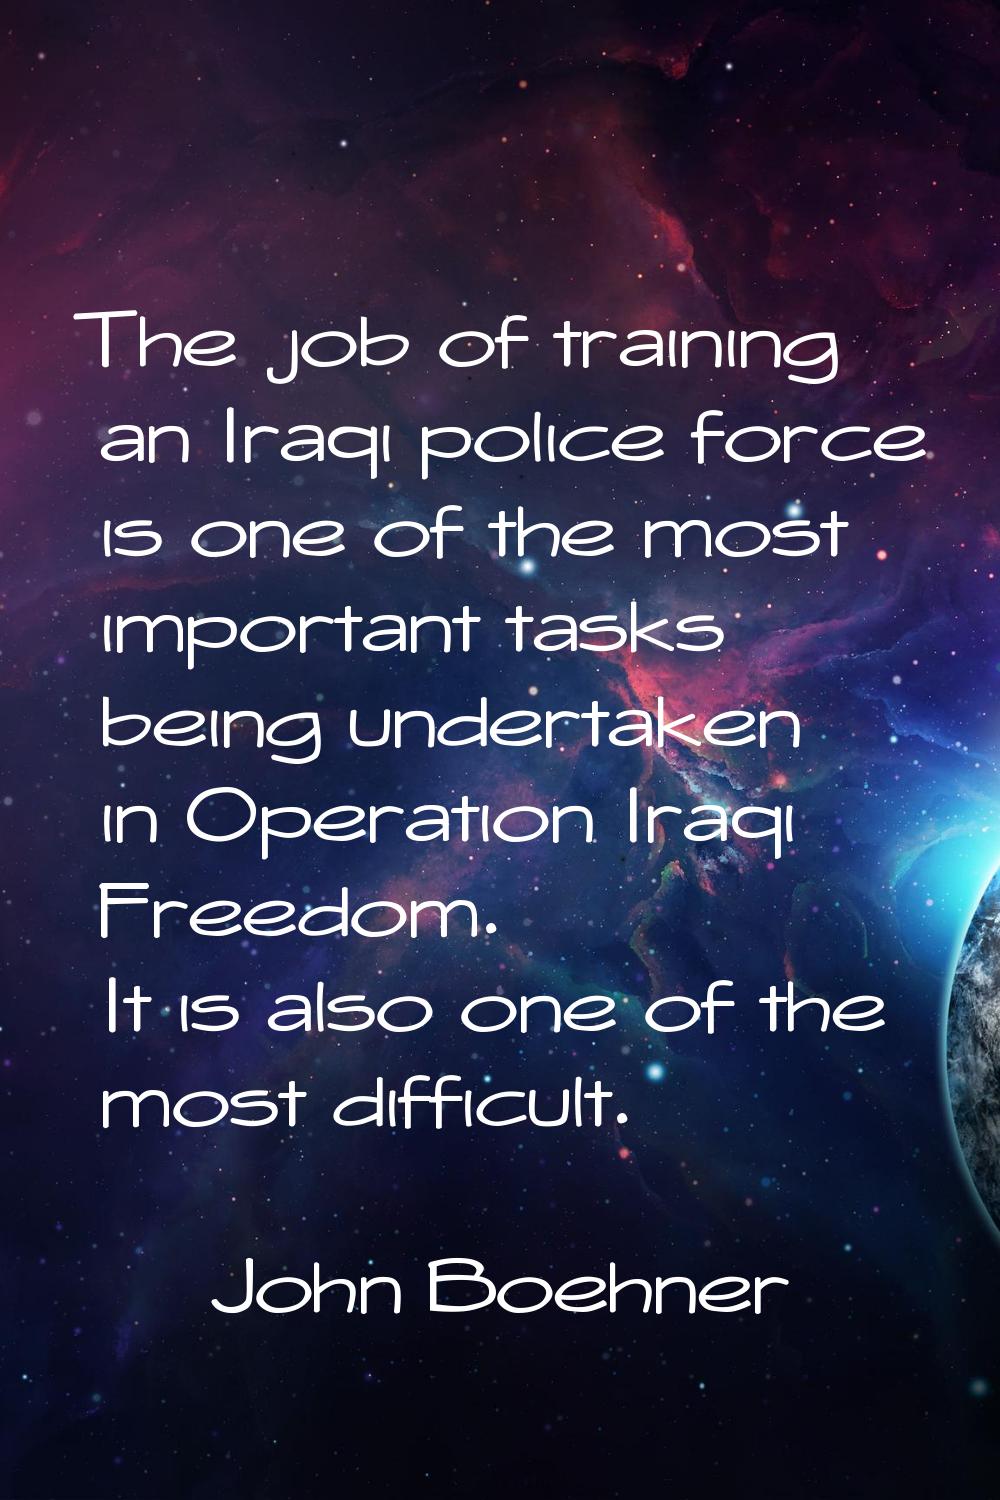 The job of training an Iraqi police force is one of the most important tasks being undertaken in Op